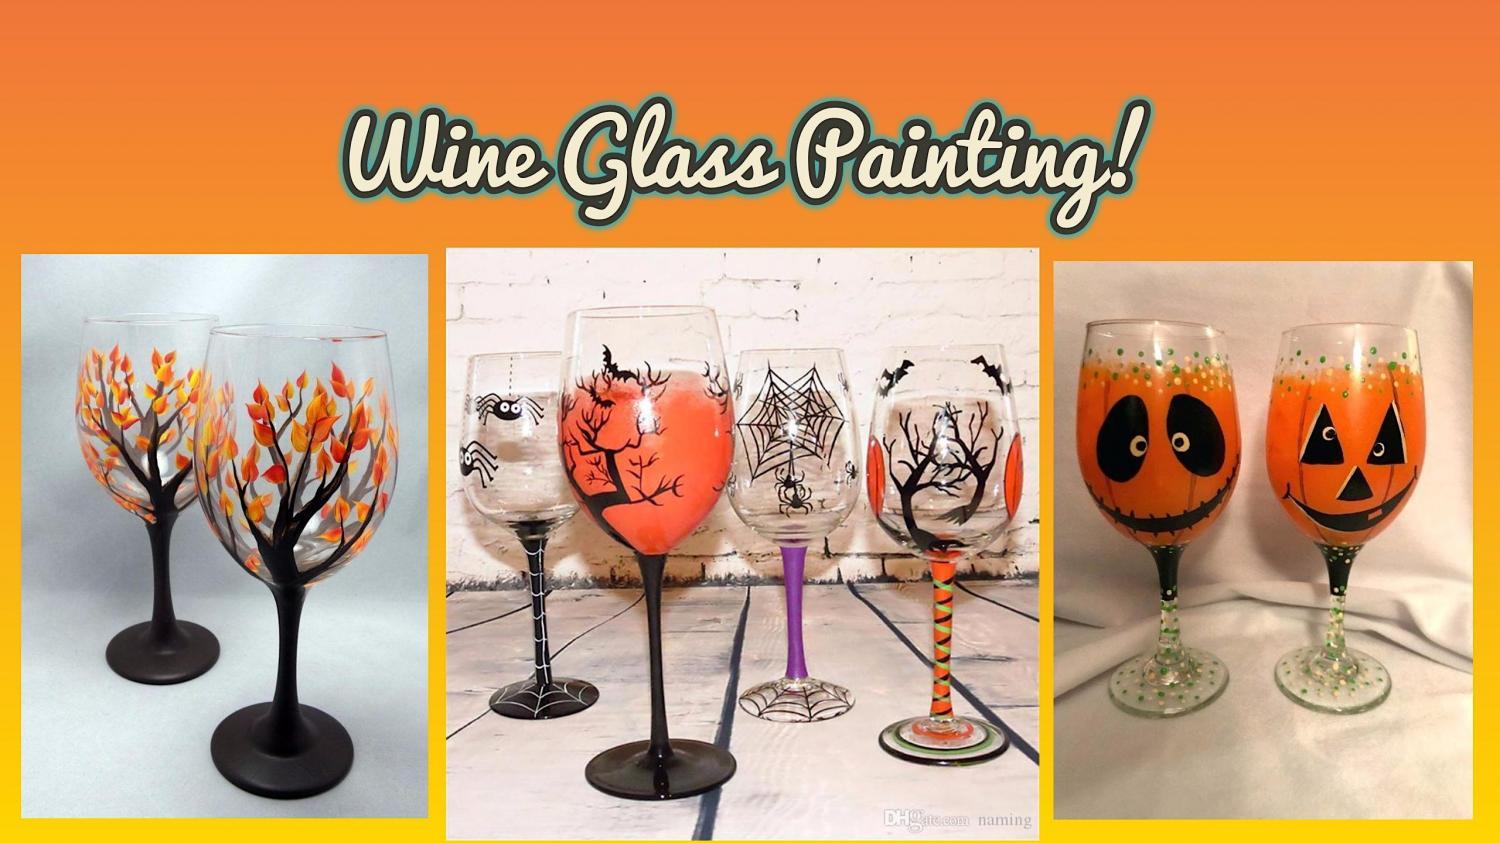 Halloween Wine Glass Painting with Amanda Moon
Sat Oct 22, 7:00 PM - Sat Oct 22, 7:00 PM
in 3 days